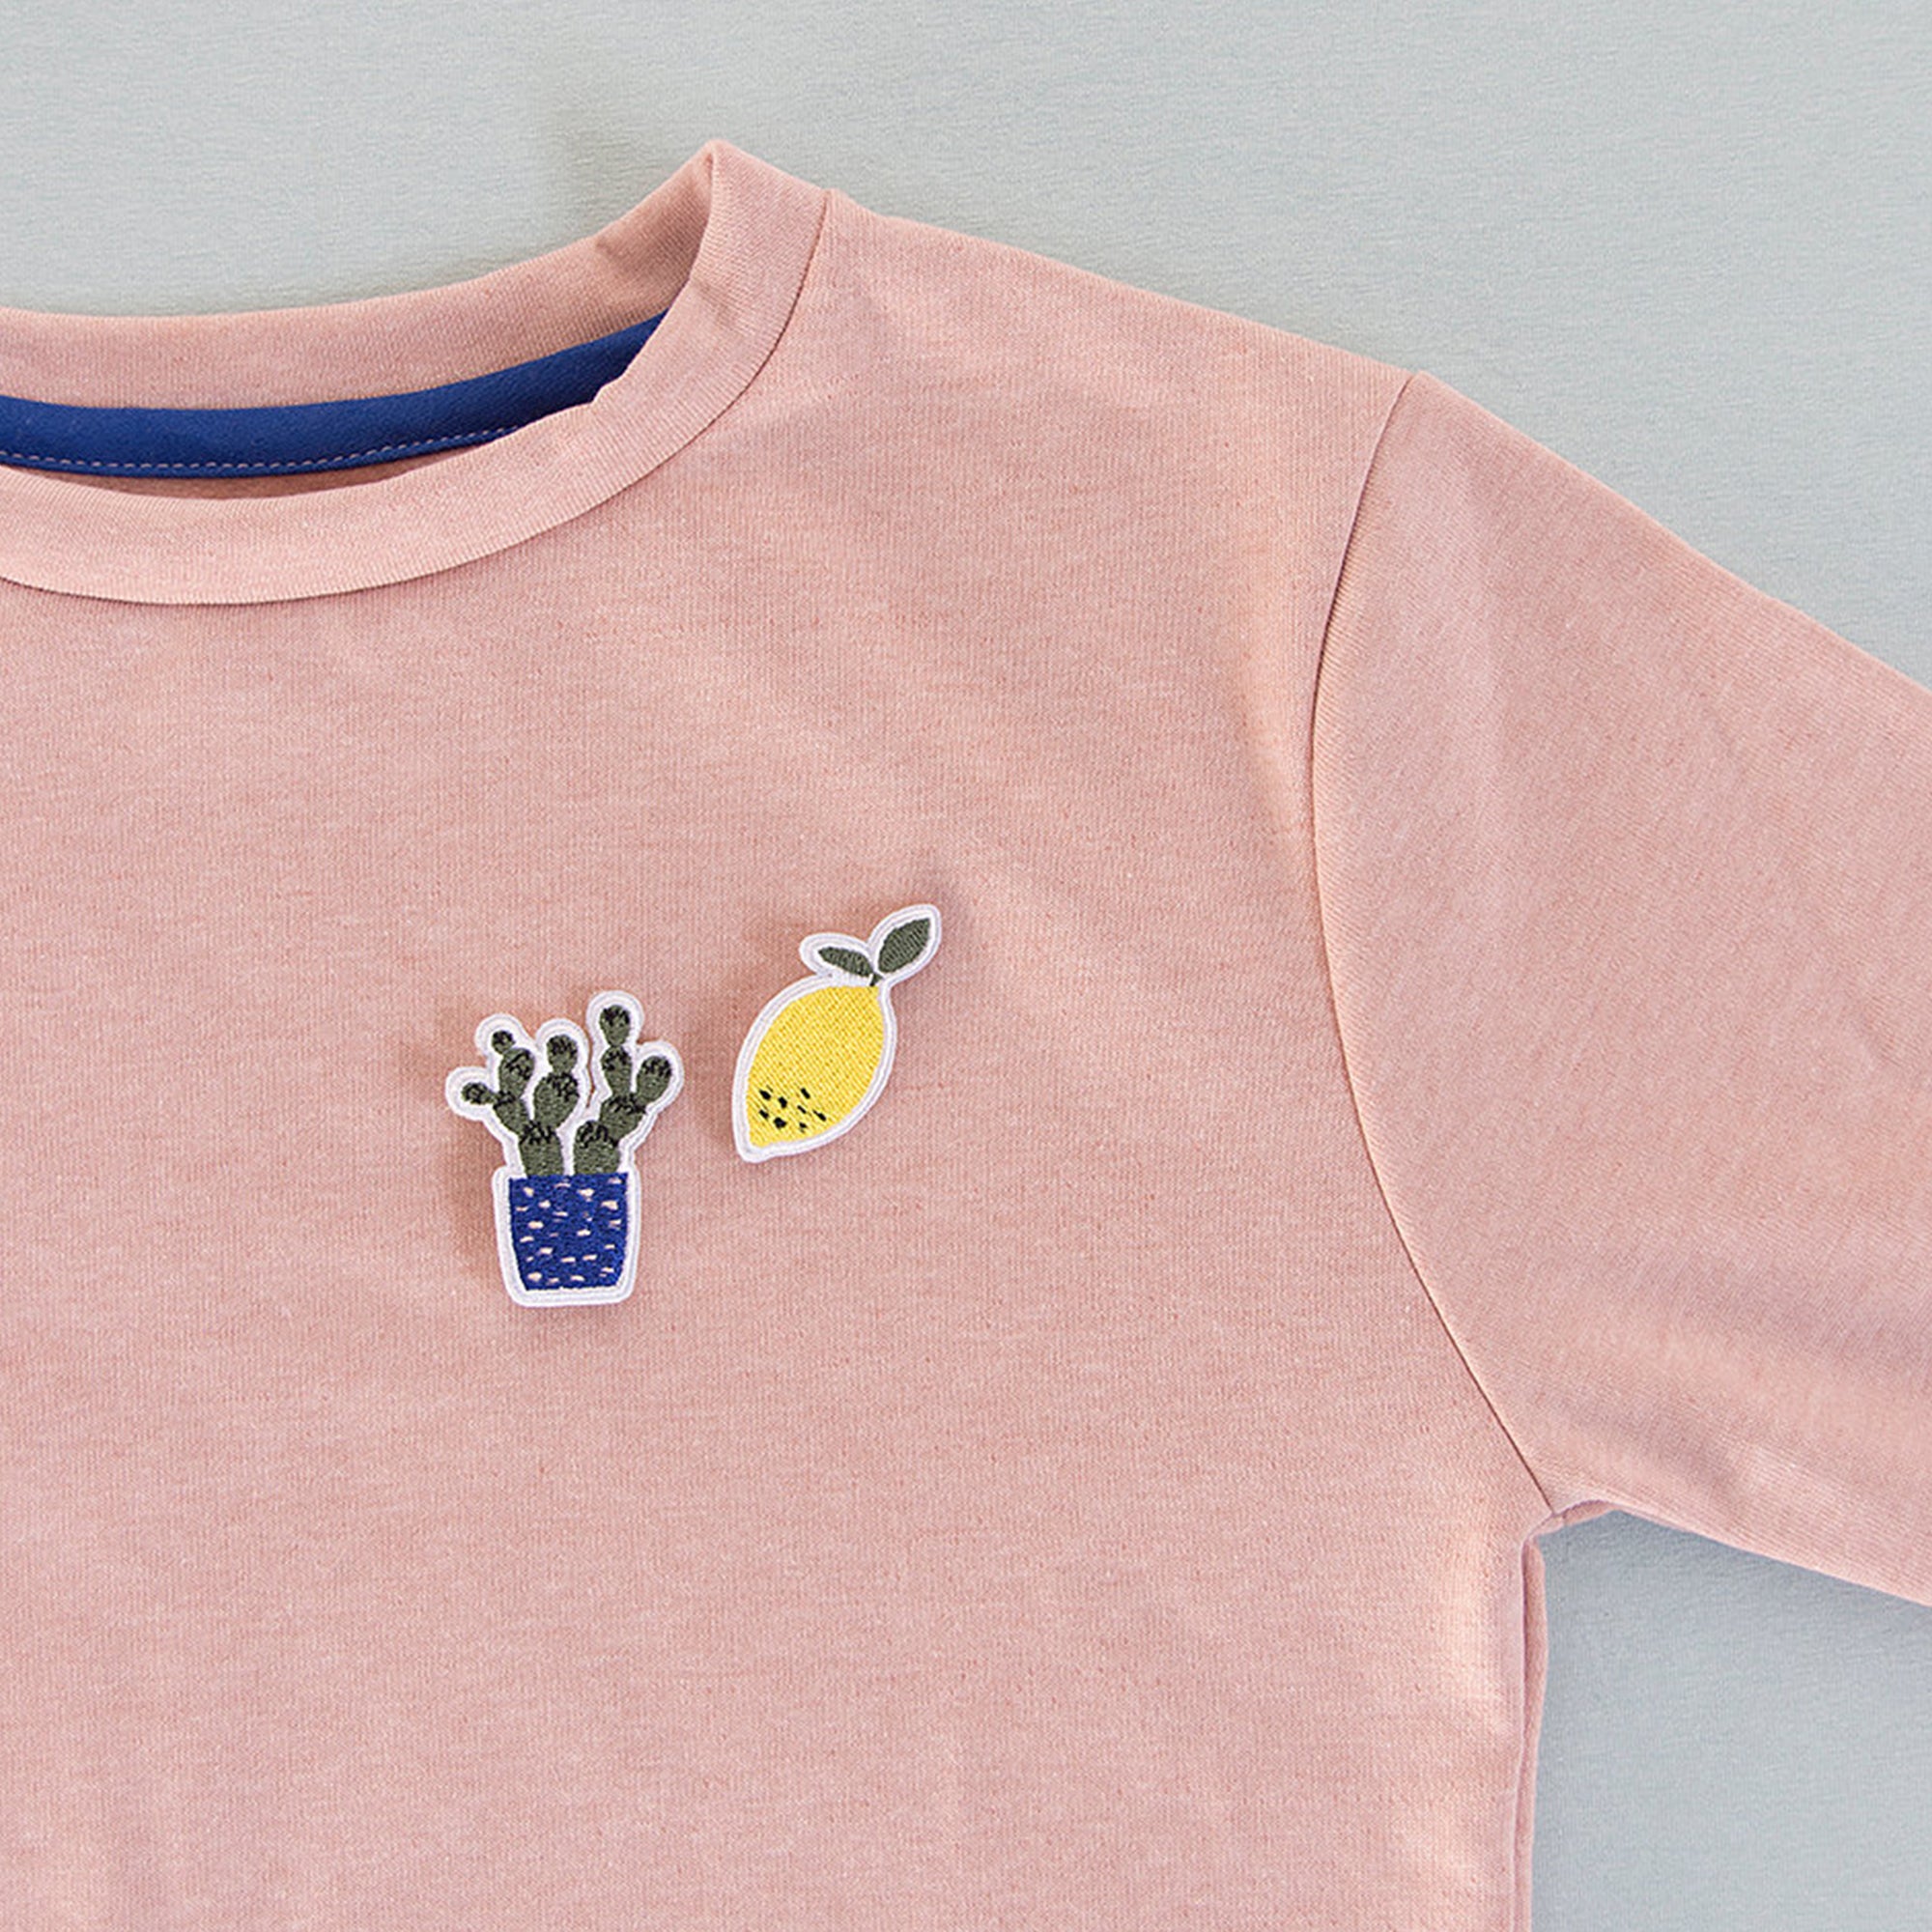 Sticky lemon Embroidered Pins Cactus